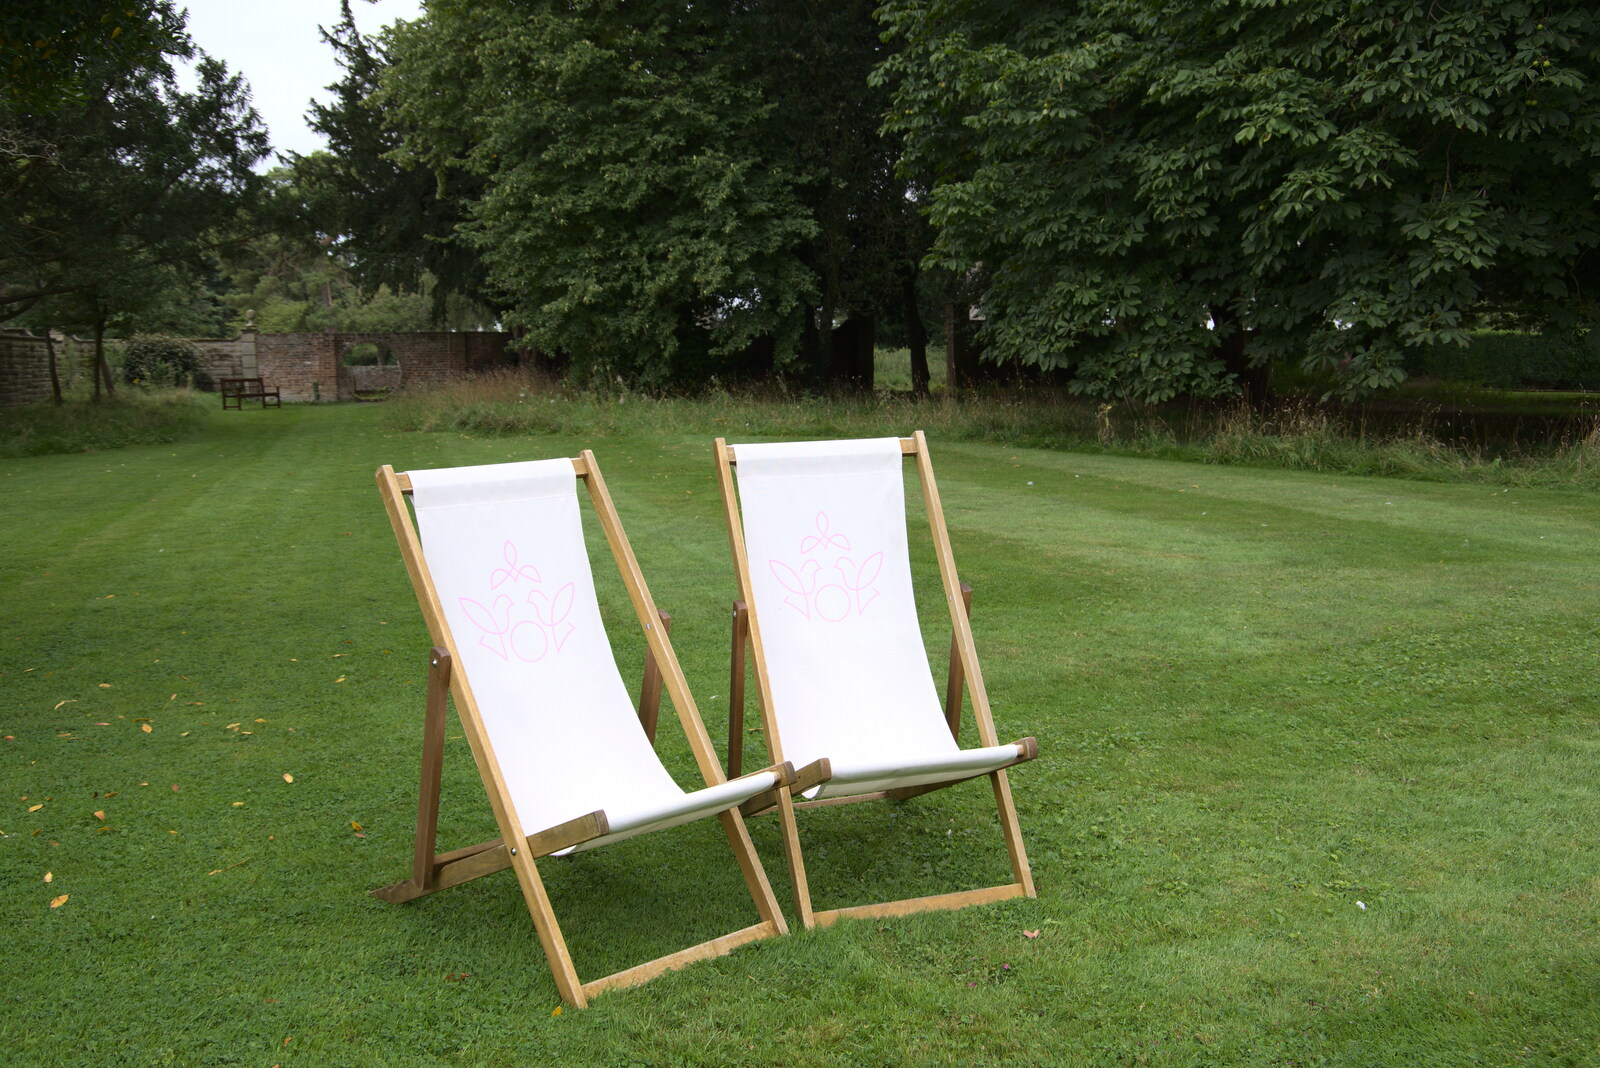 A pair of deck chairs on the lawn from Petay's Wedding Reception, Fanhams Hall, Ware, Hertfordshire - 20th August 2021